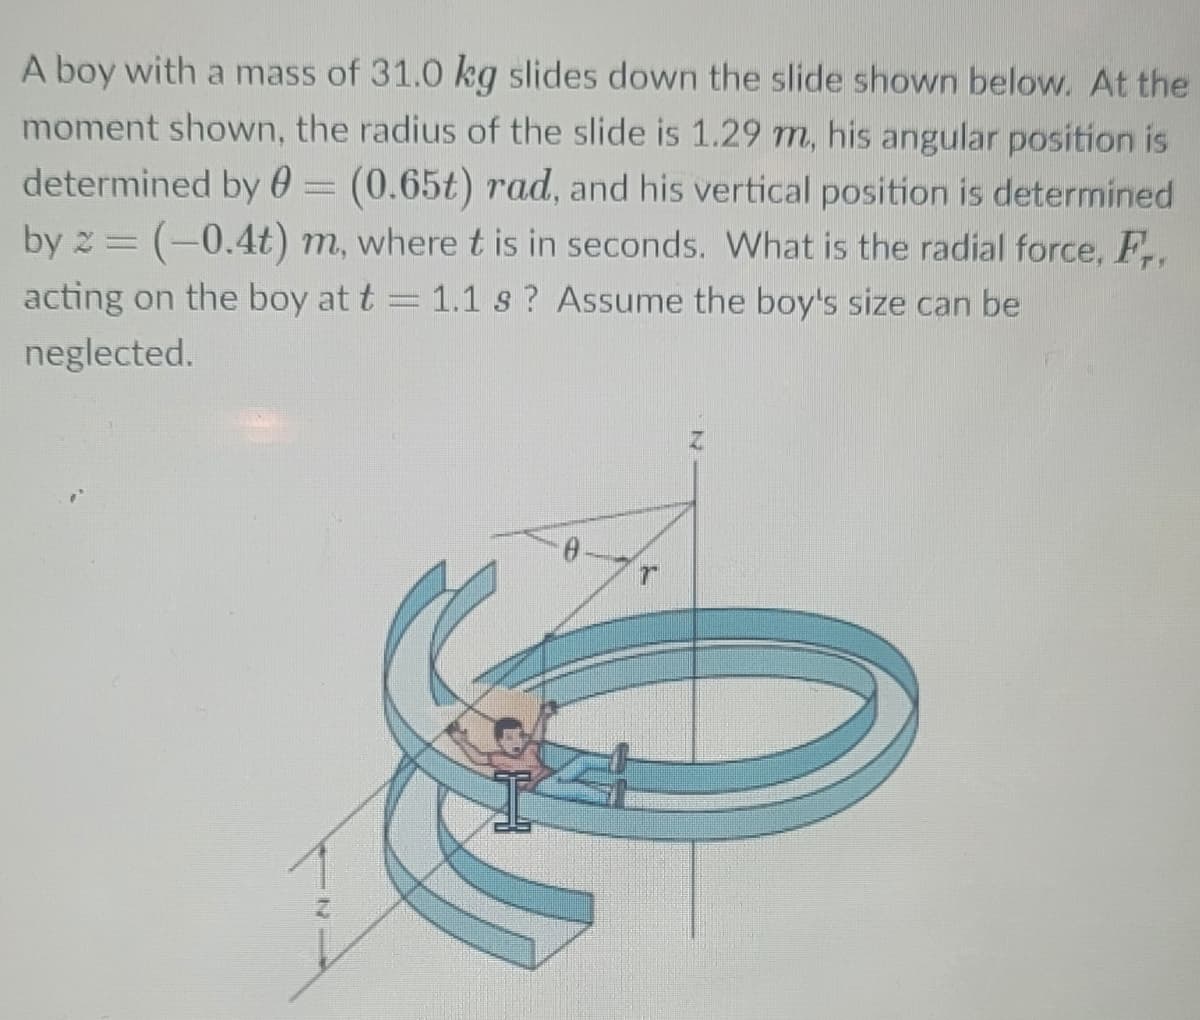 A boy with a mass of 31.0 kg slides down the slide shown below. At the
moment shown, the radius of the slide is 1.29 m, his angular position is
determined by 0 = (0.65t) rad, and his vertical position is determined
by 2 = (-0.4t) m, where t is in seconds. What is the radial force, F,
acting on the boy at t = 1.1 s? Assume the boy's size can be
neglected.
